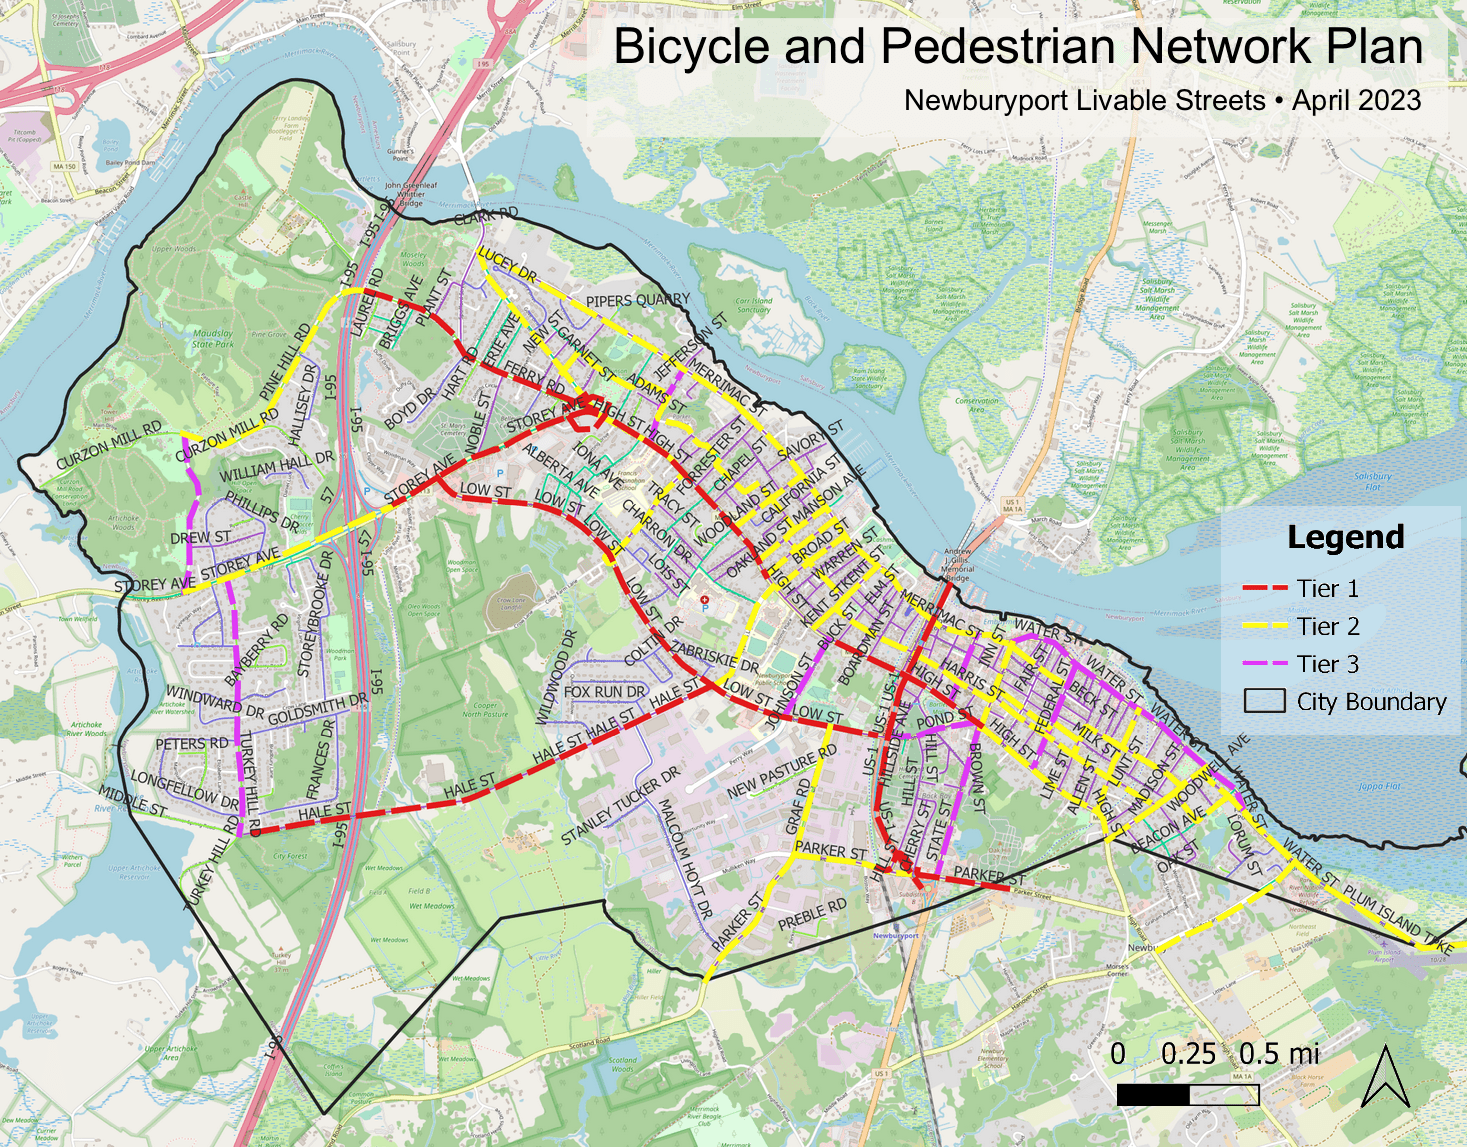 Bicycle and Pedestrian Network Plan: map of Newburyport with proposed network links, categorized as Tier 1, Tier 2 and Tier 3